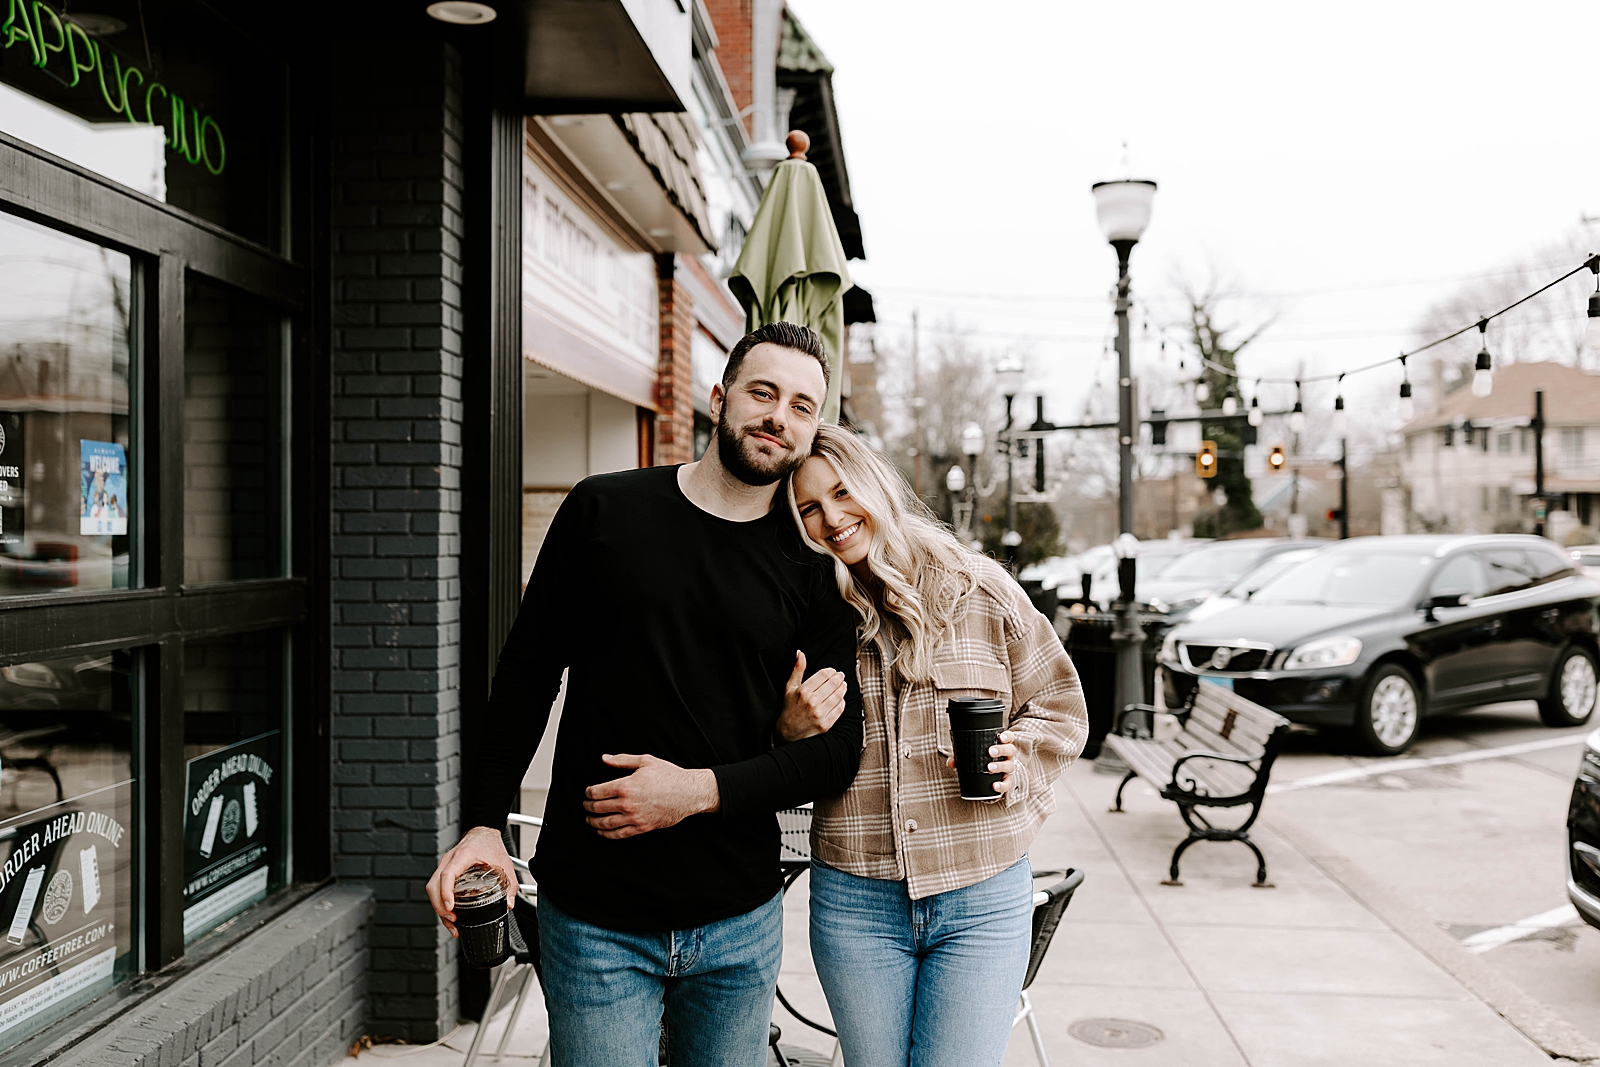 The Coffee Roasters Mt. Lebanon Beverly Road engagement photos